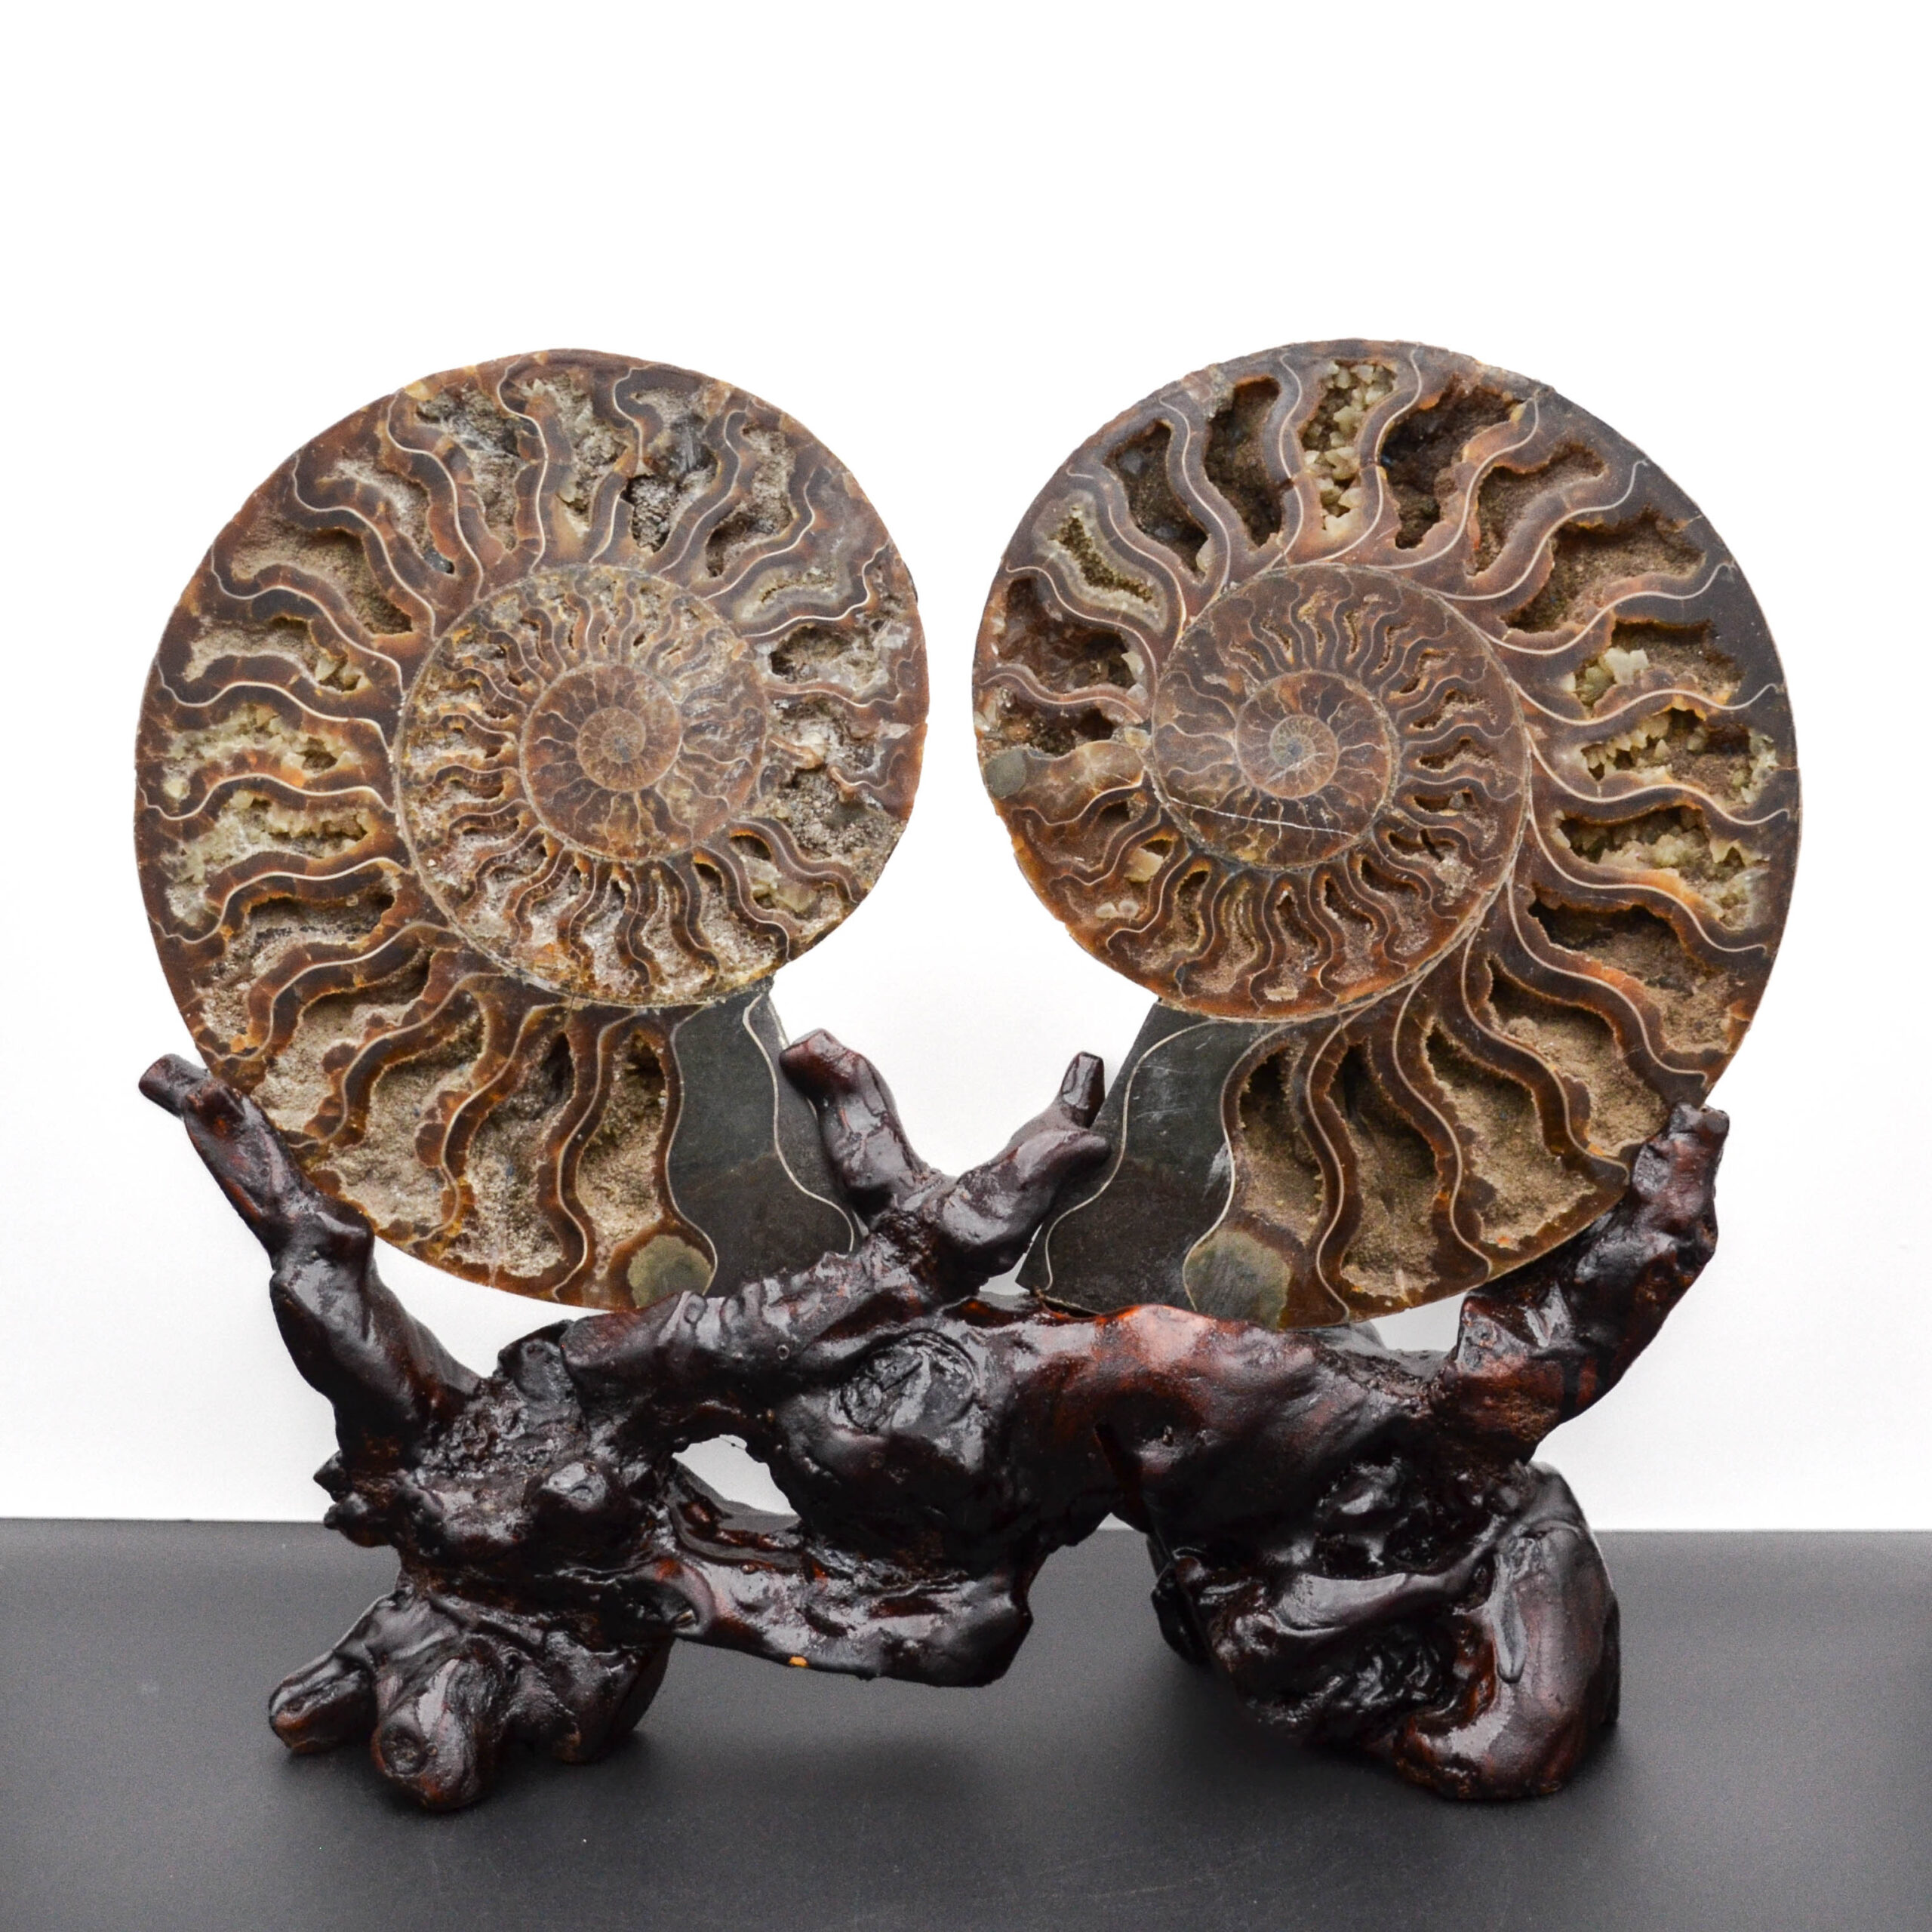 Large Split Pair Ammonite Conch Fossils with Custom Wood Double Stand